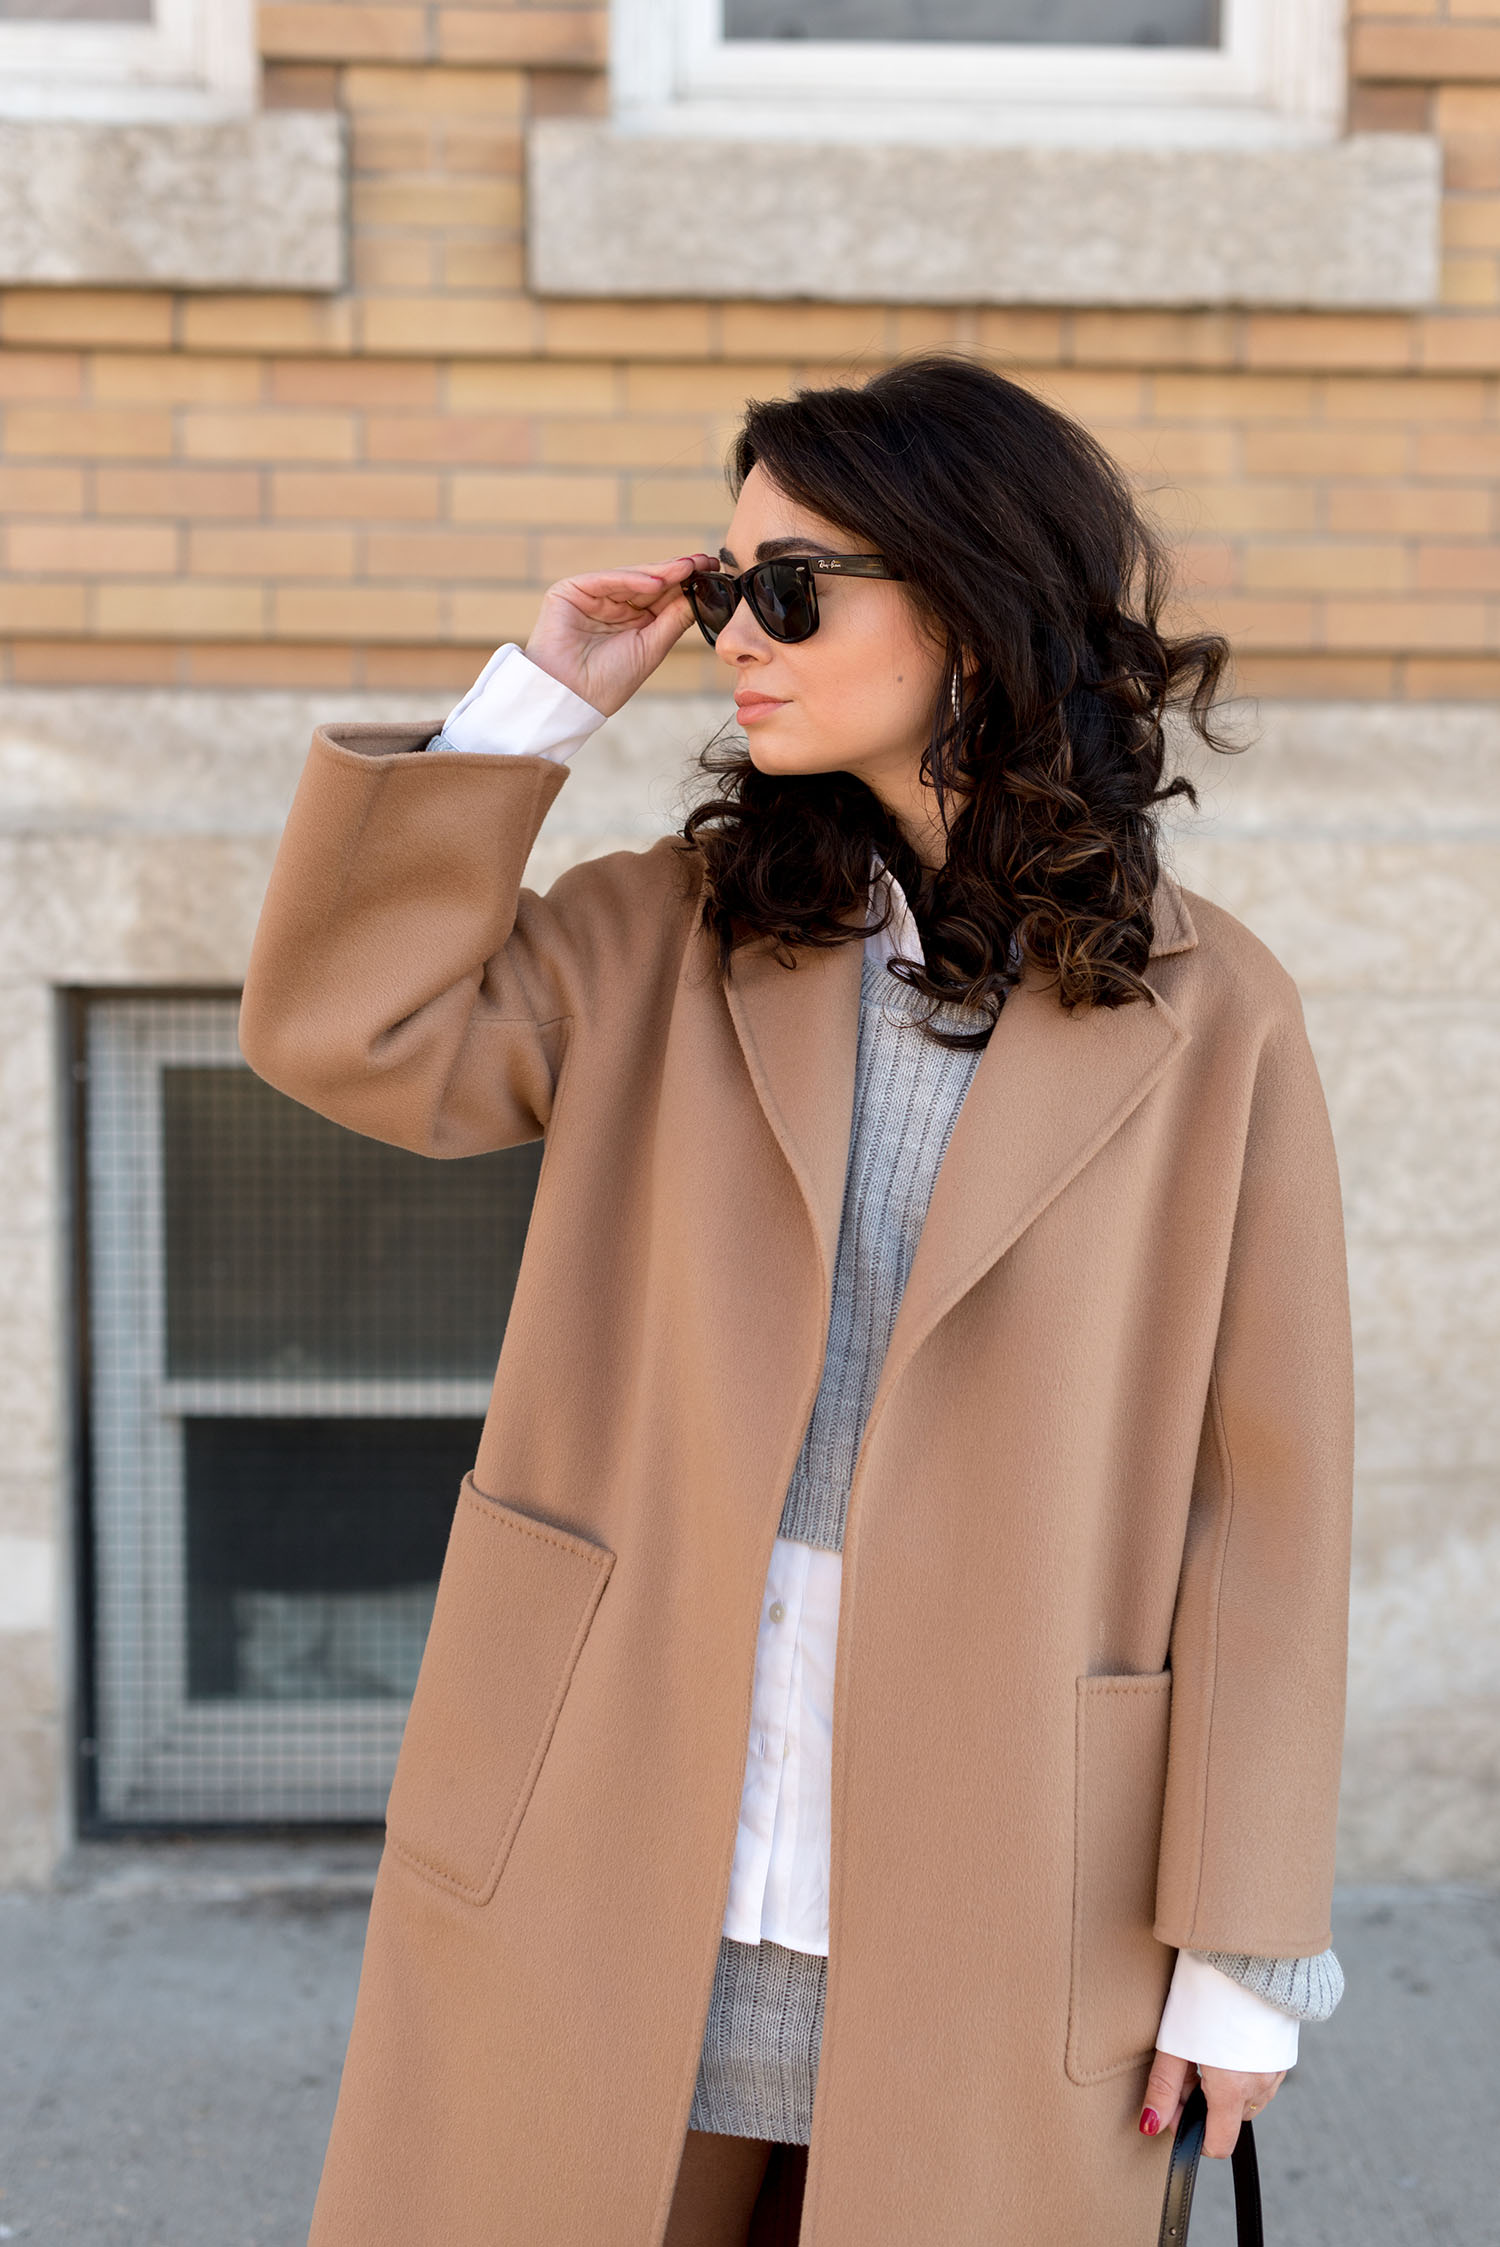 Coco & Vera - RayBan Wayfarer sunglasses, In the Style knit top, The Curated coat